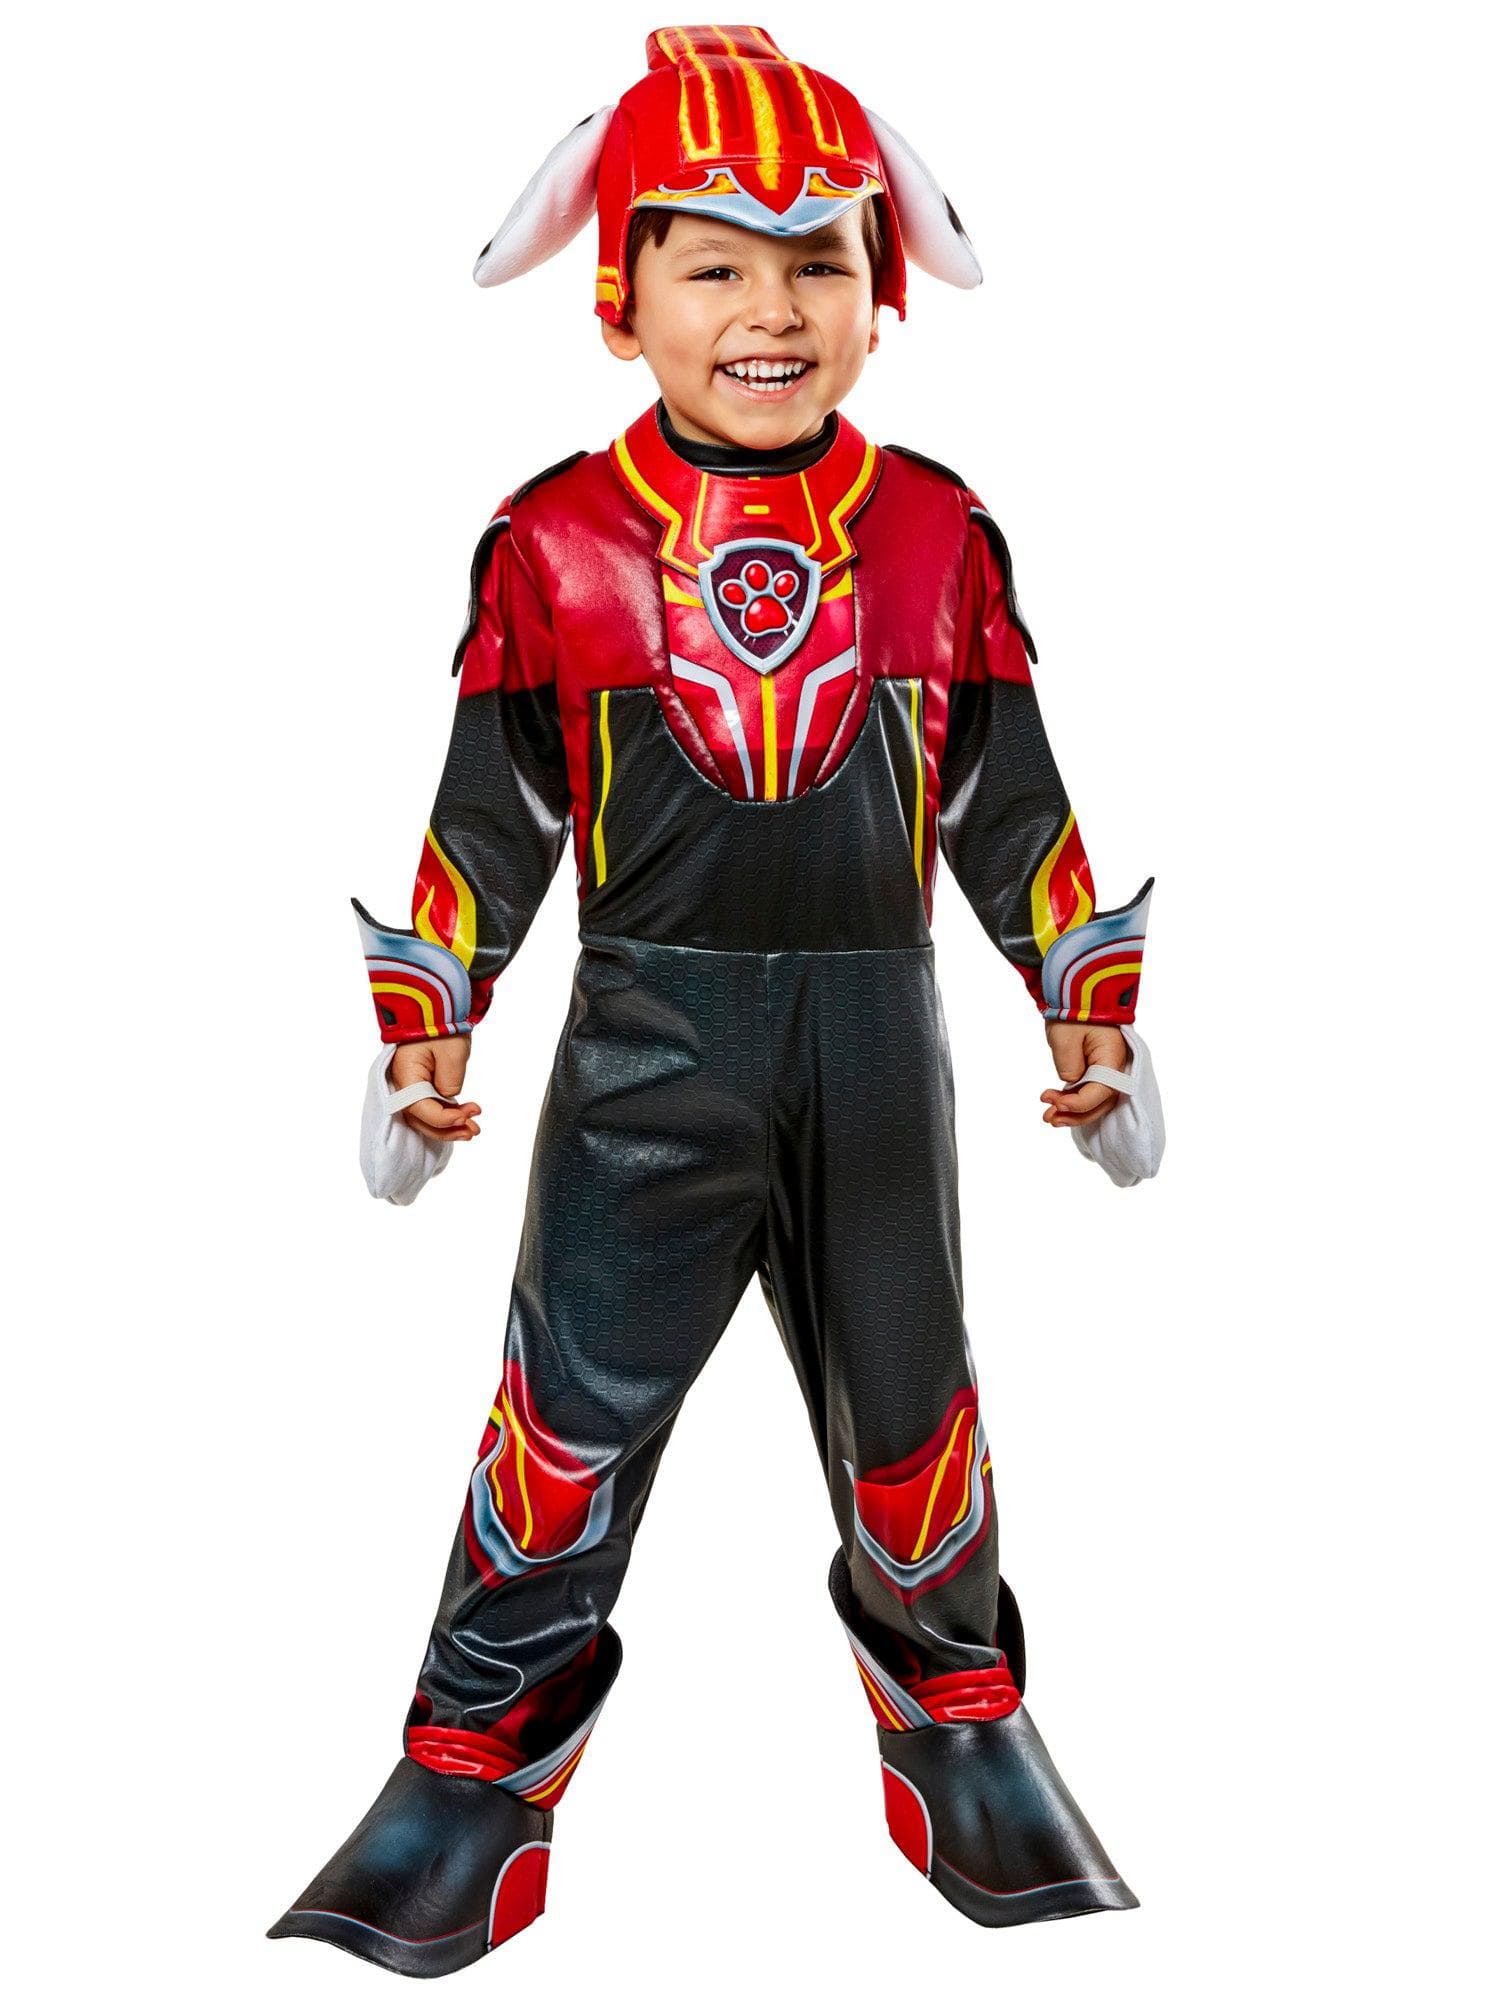 Paw Patrol 2 Mighty Marshall Costume for Toddlers - costumes.com